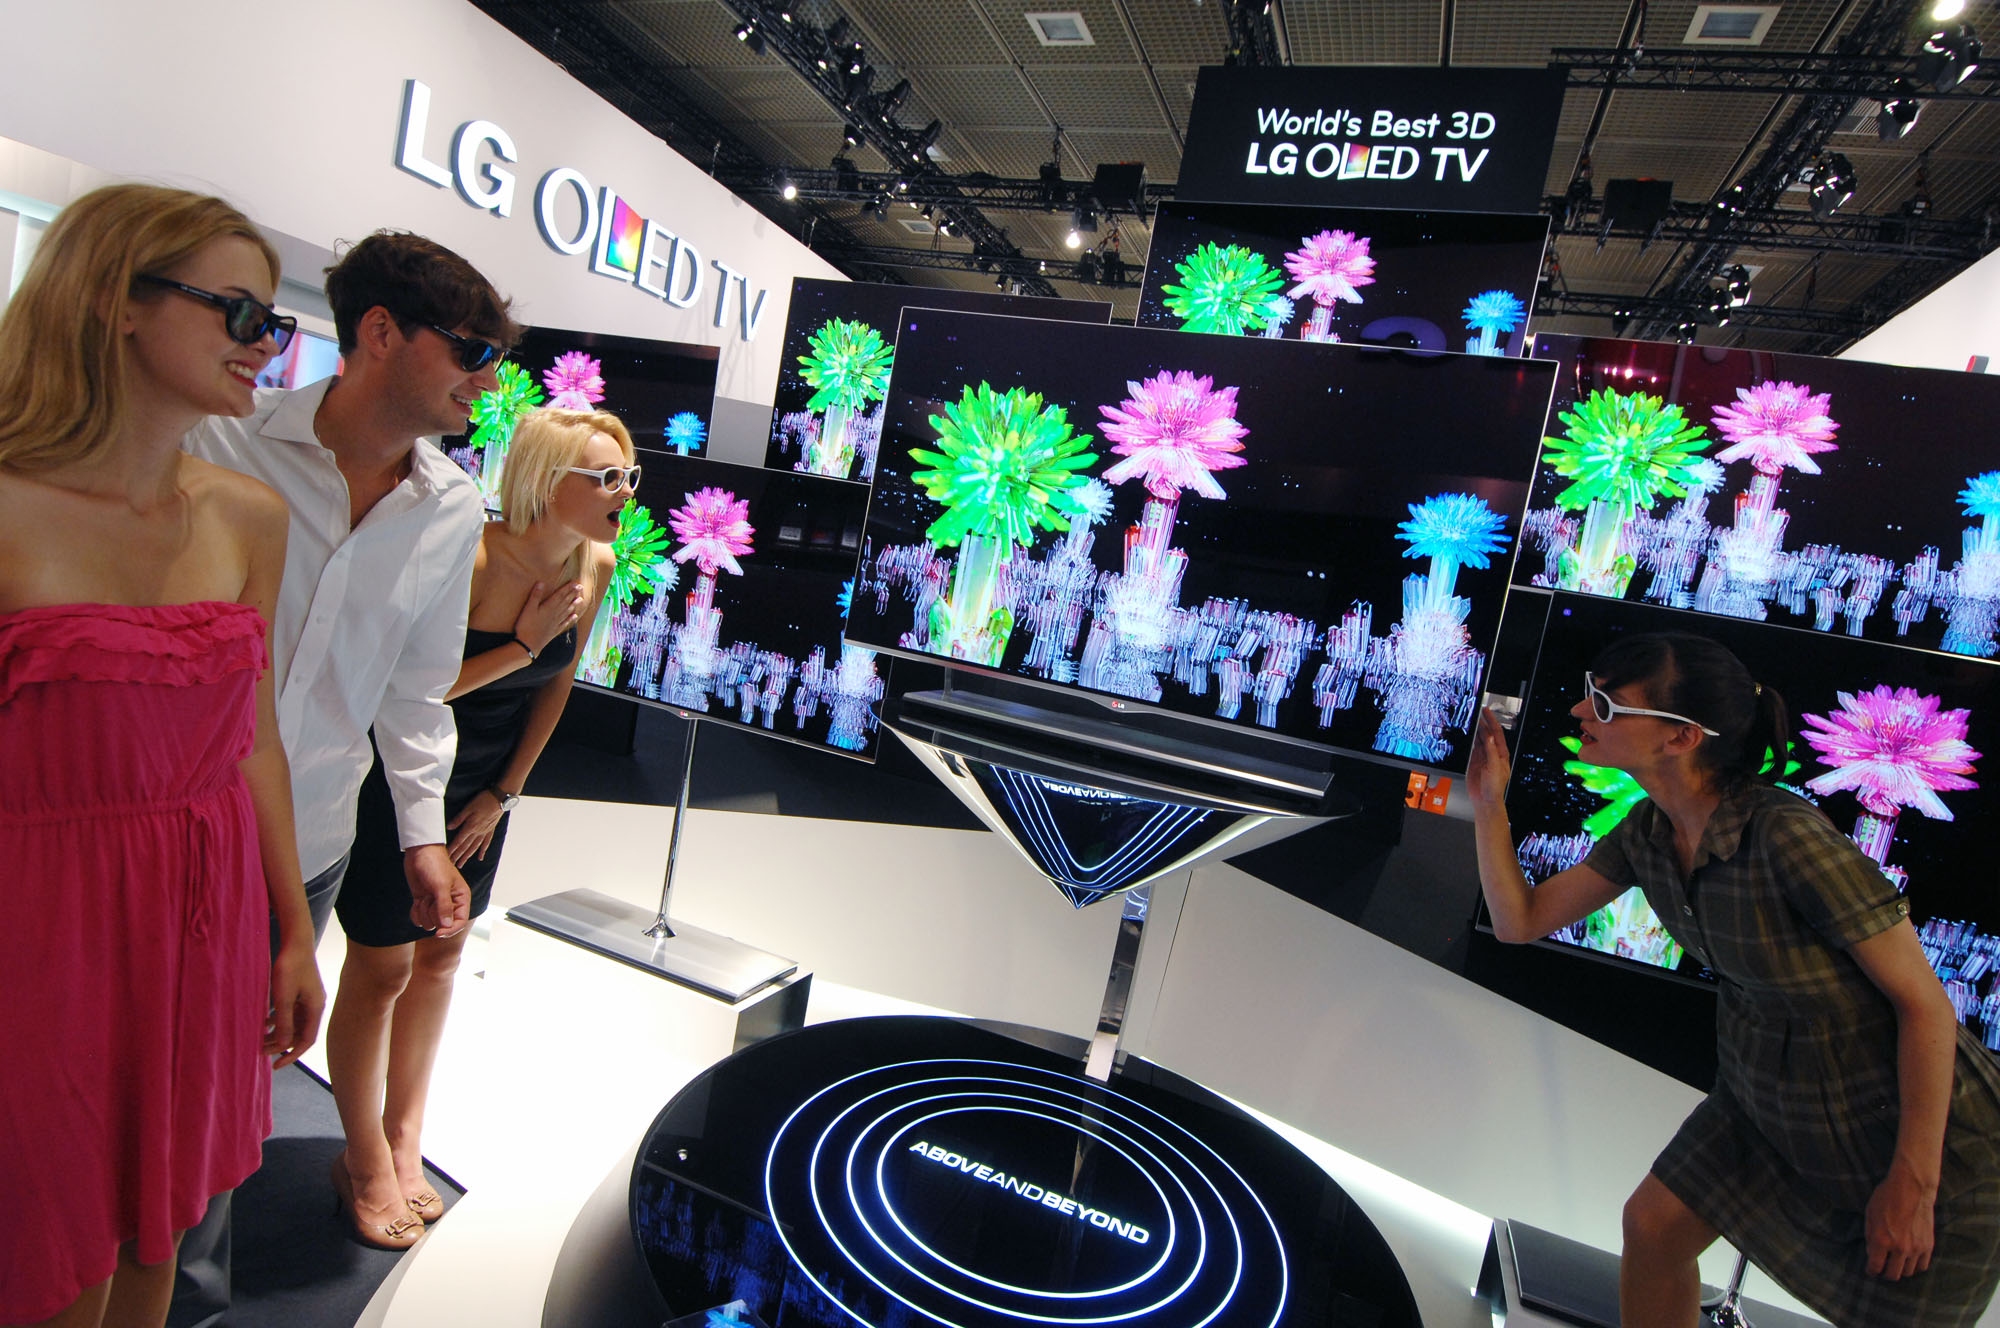 Visitors to LG’s booth experiencing the company’s 3D OLED TVs at IFA 2012